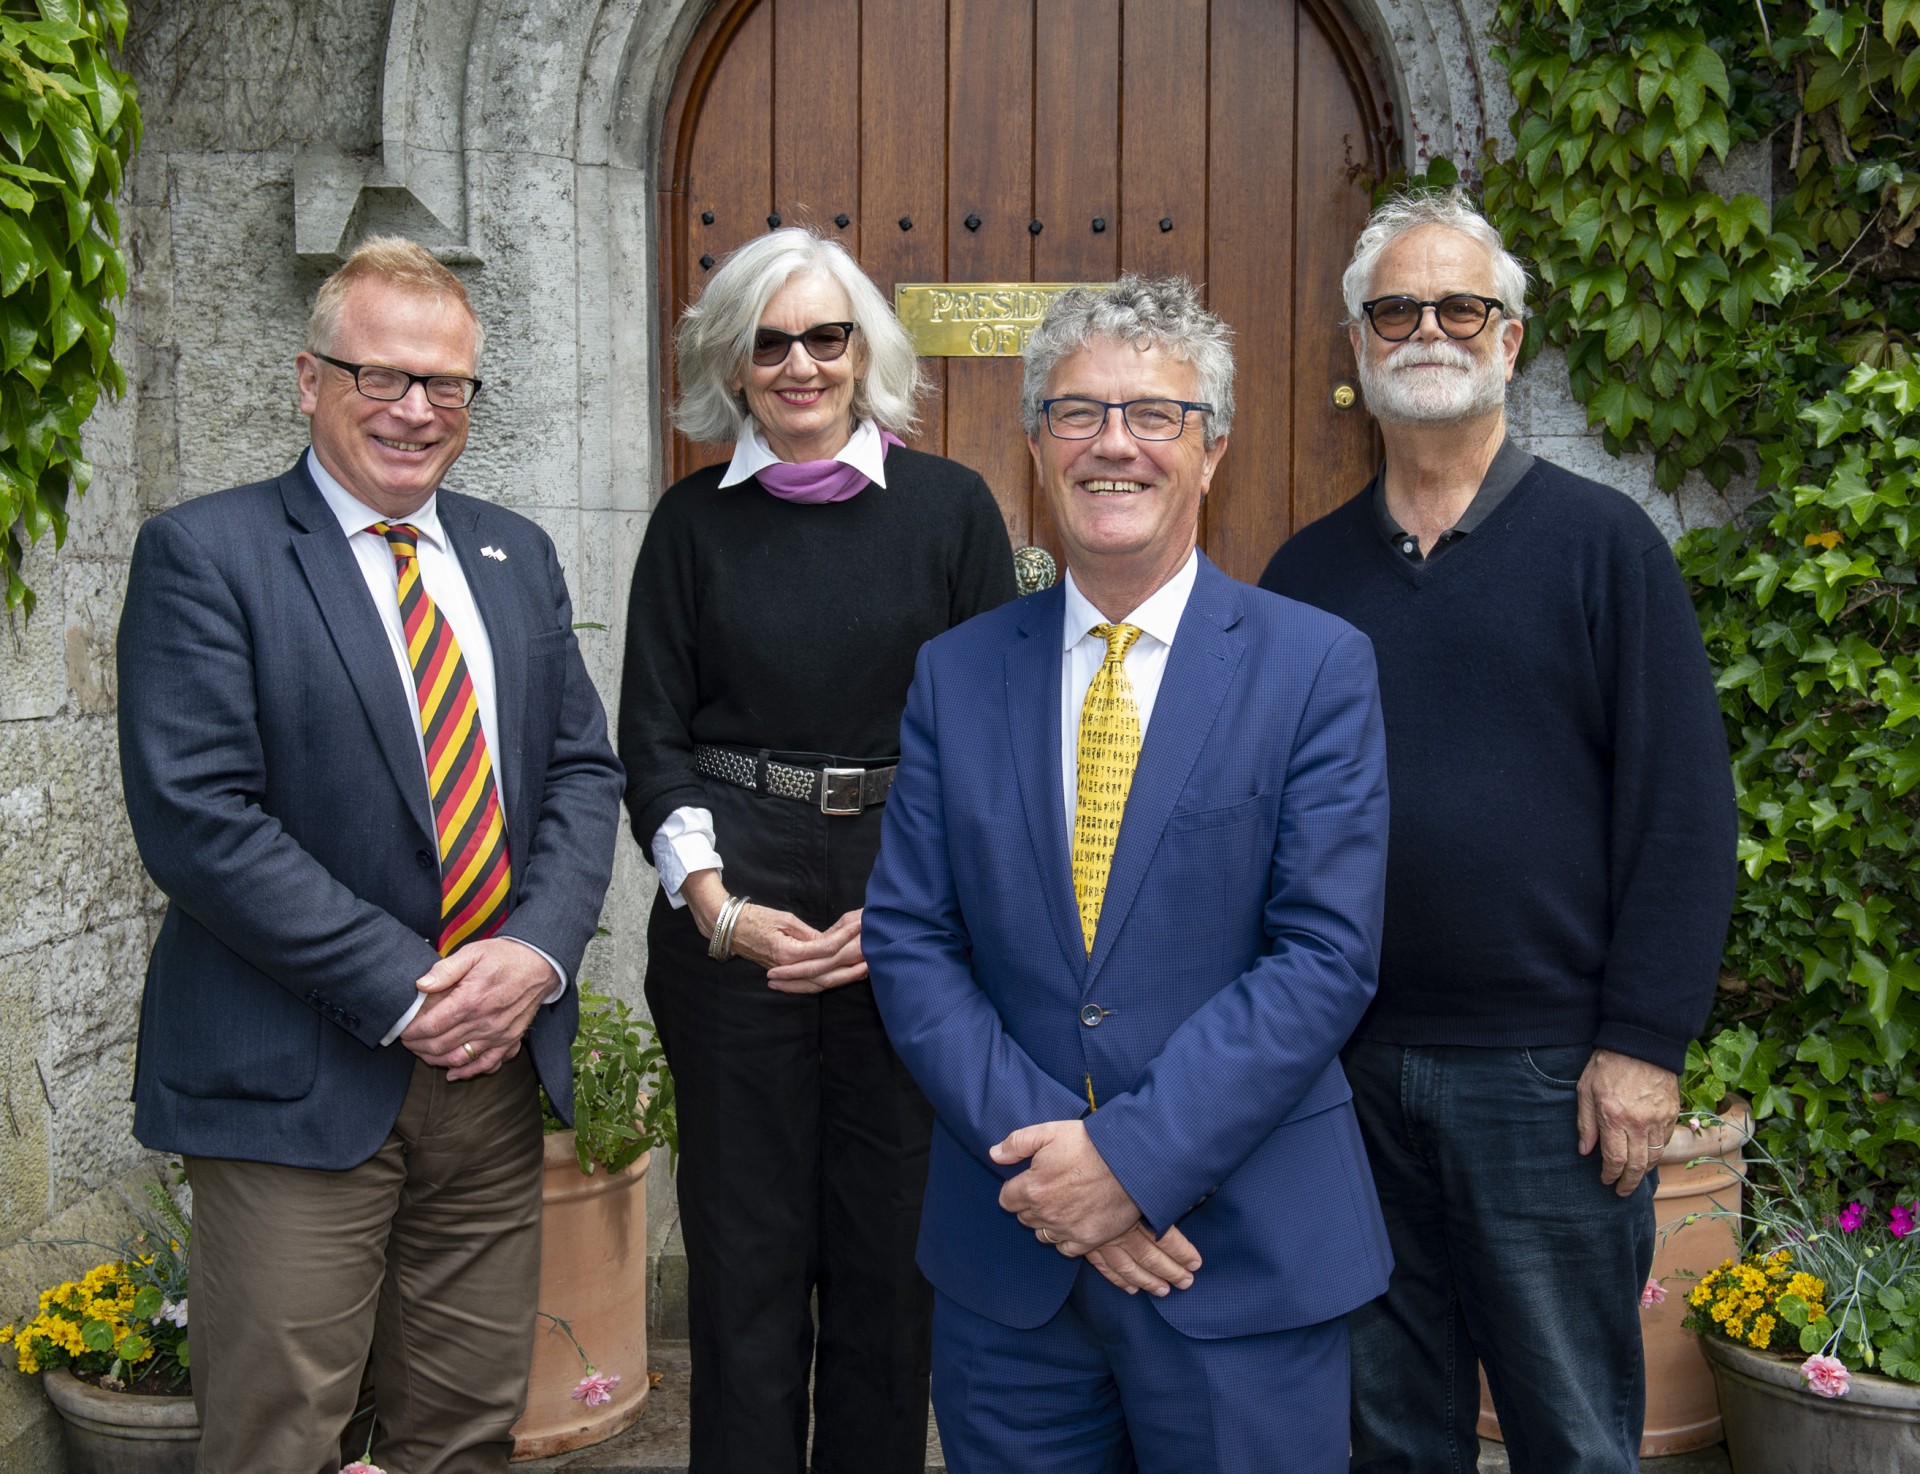 Doug Murray (on the right) with his wife Betch, and Prof. Chris Williams, Head of the College of Arts, Celtic Studies and Social Sciences, and UCC President Prof. John O'Halloran